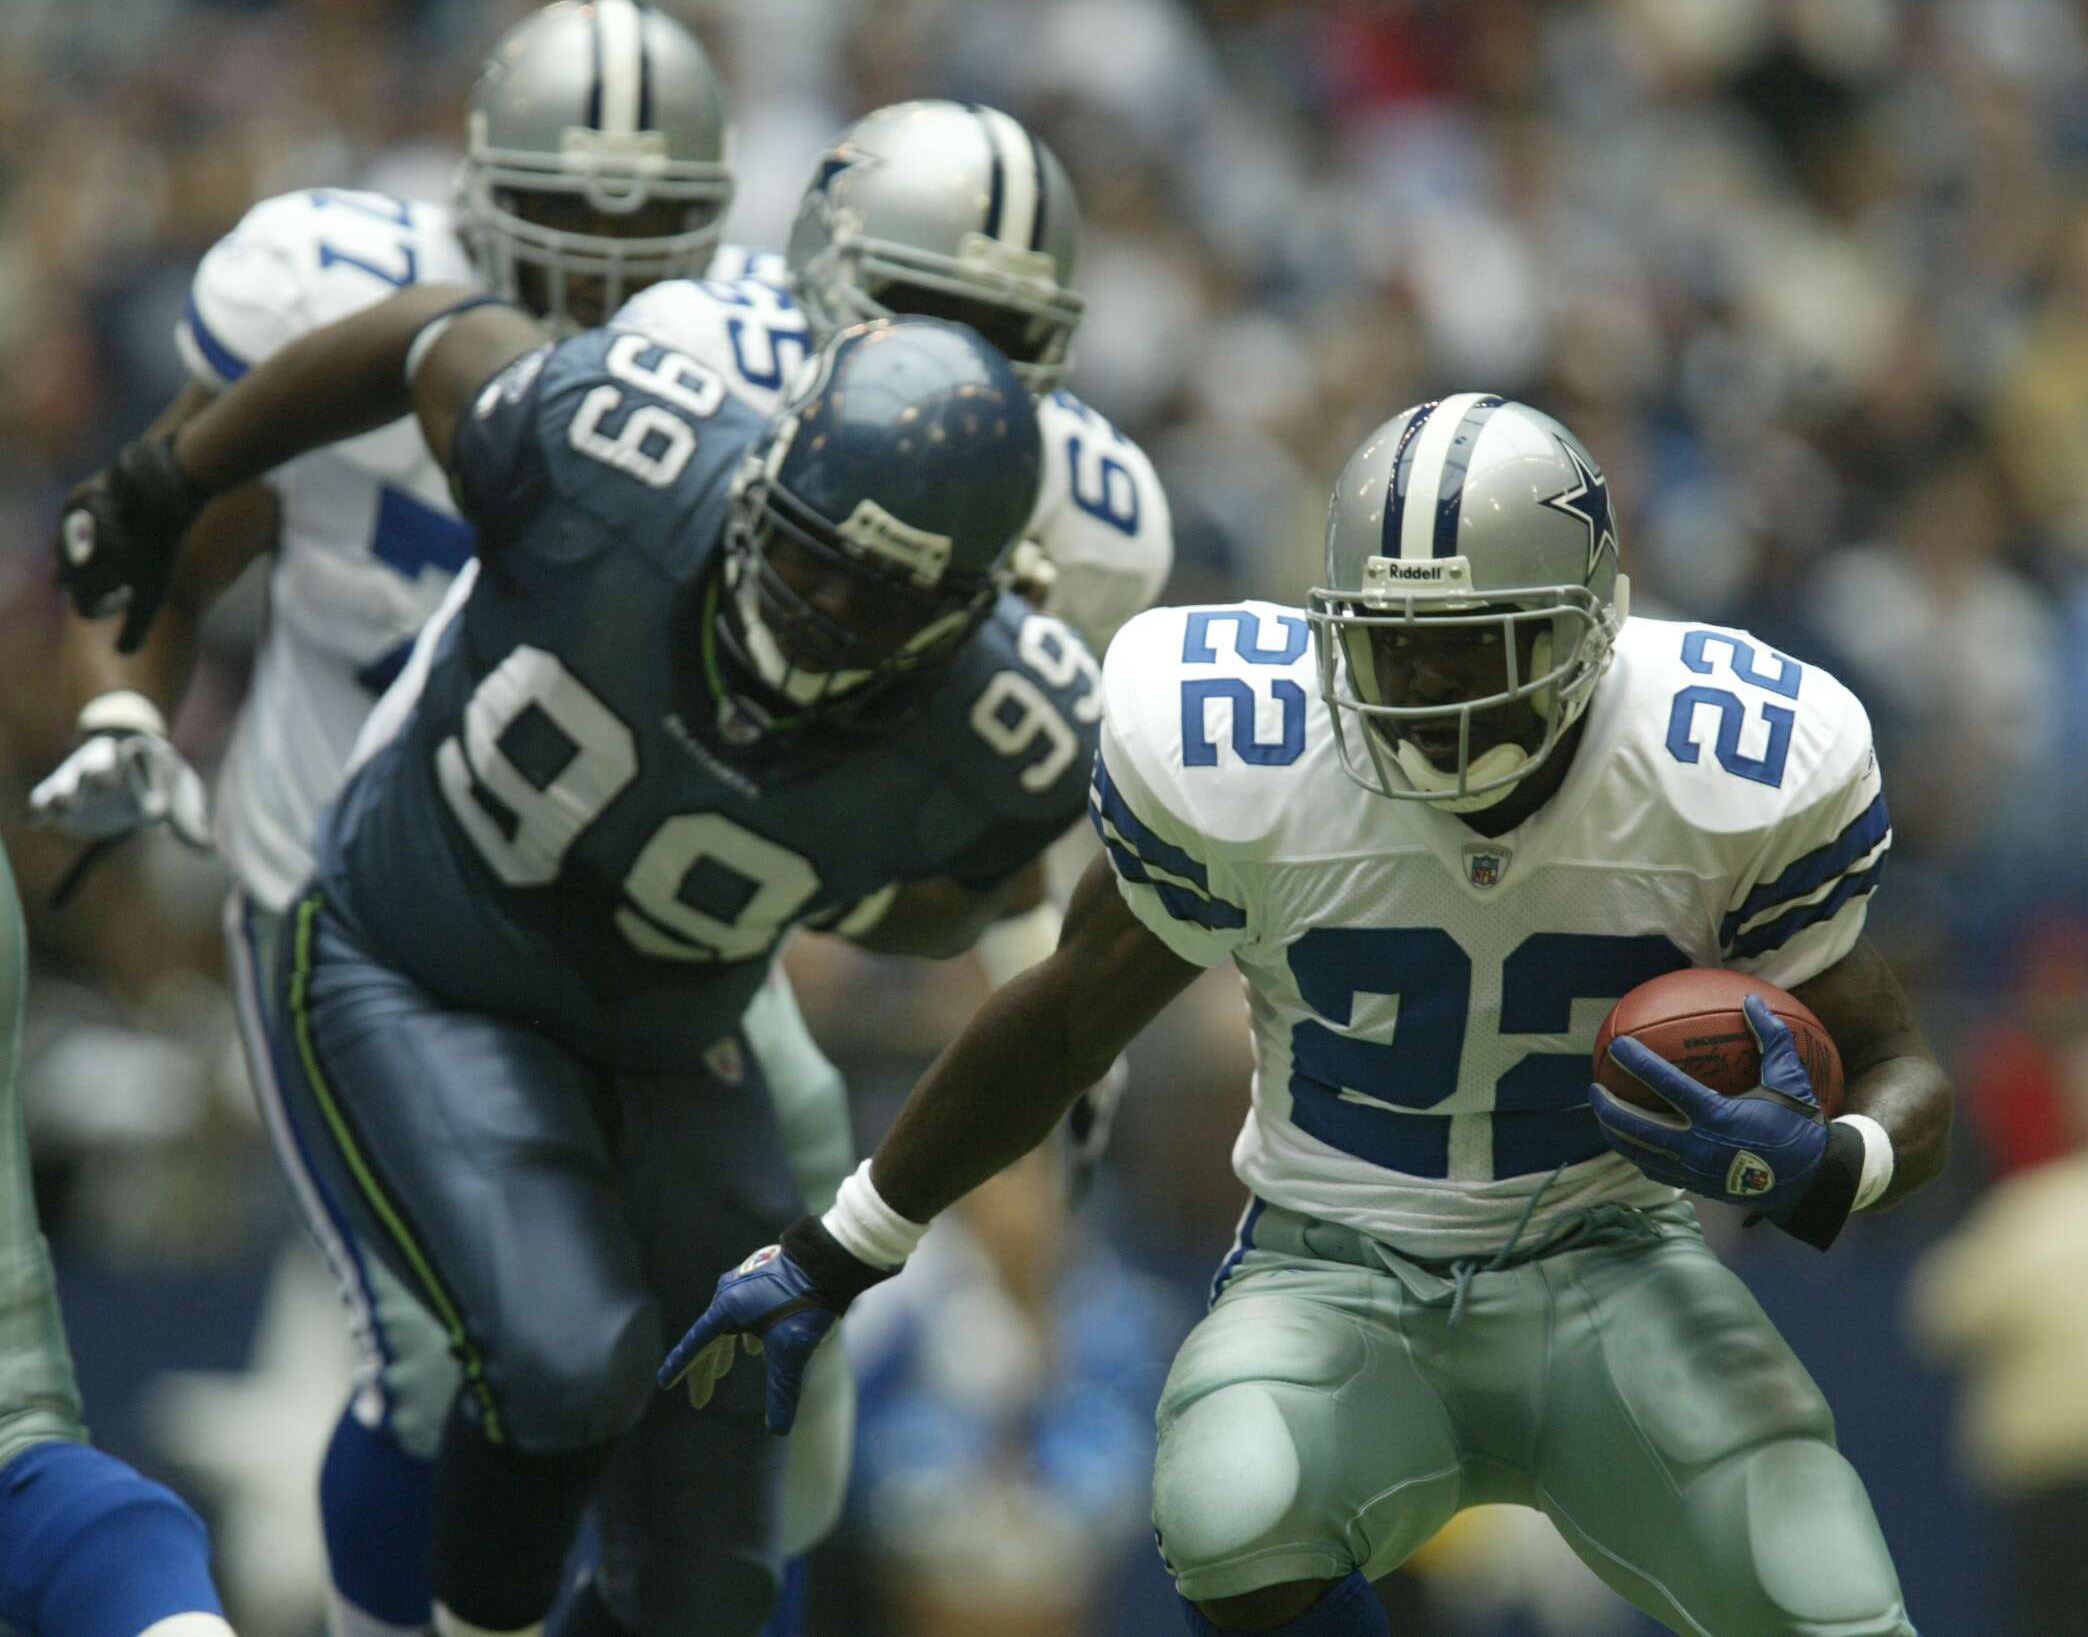 IRVING, TX - OCTOBER 27:  Emmitt Smith #22 of the Dallas Cowboys carries the ball as Rocky Bernard #99 of the Seattle Seahawks pursues on October 27, 2002 at Texas Stadium in Irving, Texas.  Smith later set the NFL all time rushing record, but the Seahawk